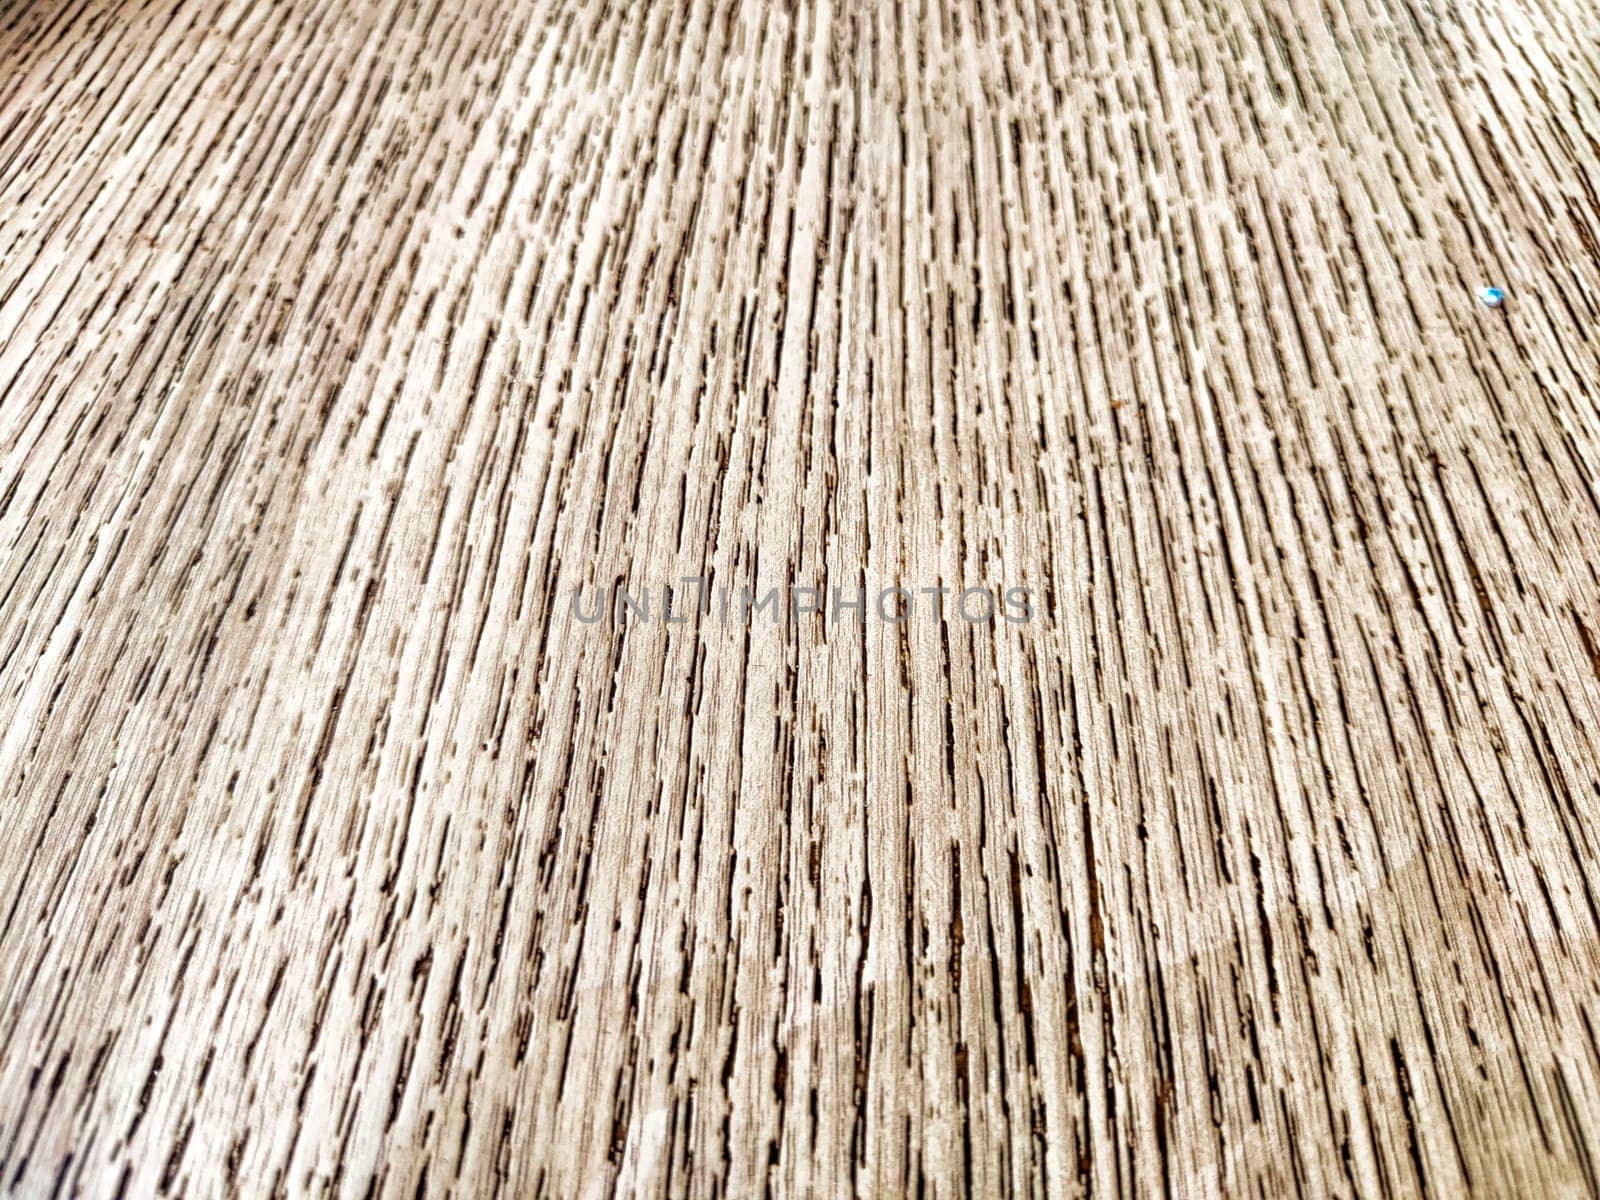 Textured Wooden Surface Detail Captured in Natural Light. Close-up of the intricate grain pattern on wooden surface.